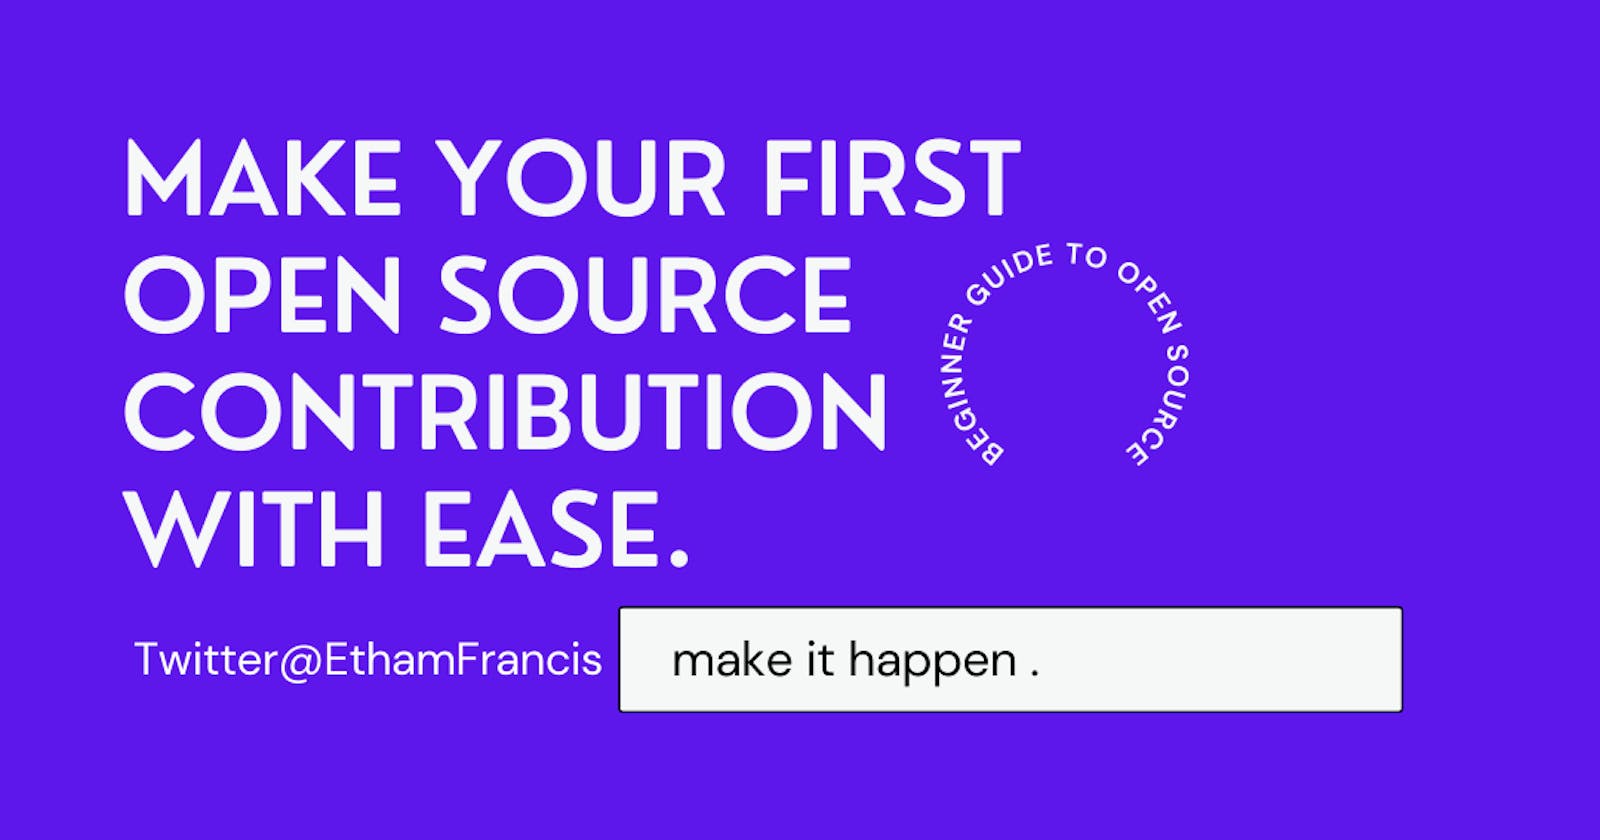 Make Your First Open Source Contribution With Ease.